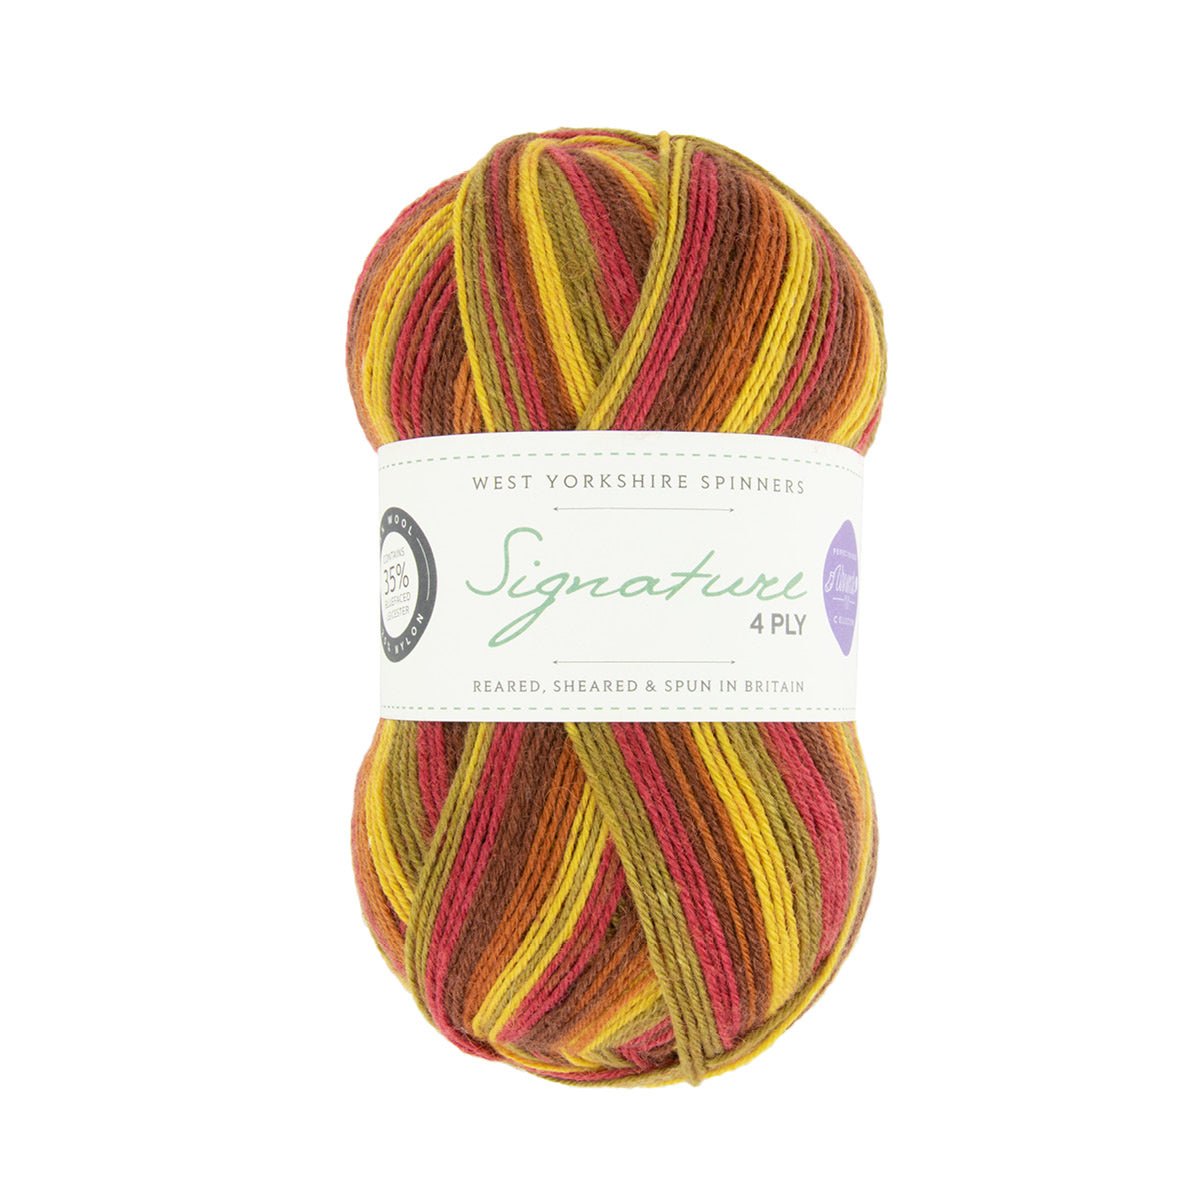 SIGNATURE 4PLY - Seasons by Winwick Mum 885-Autumn Leaves - West Yorkshire Spinners